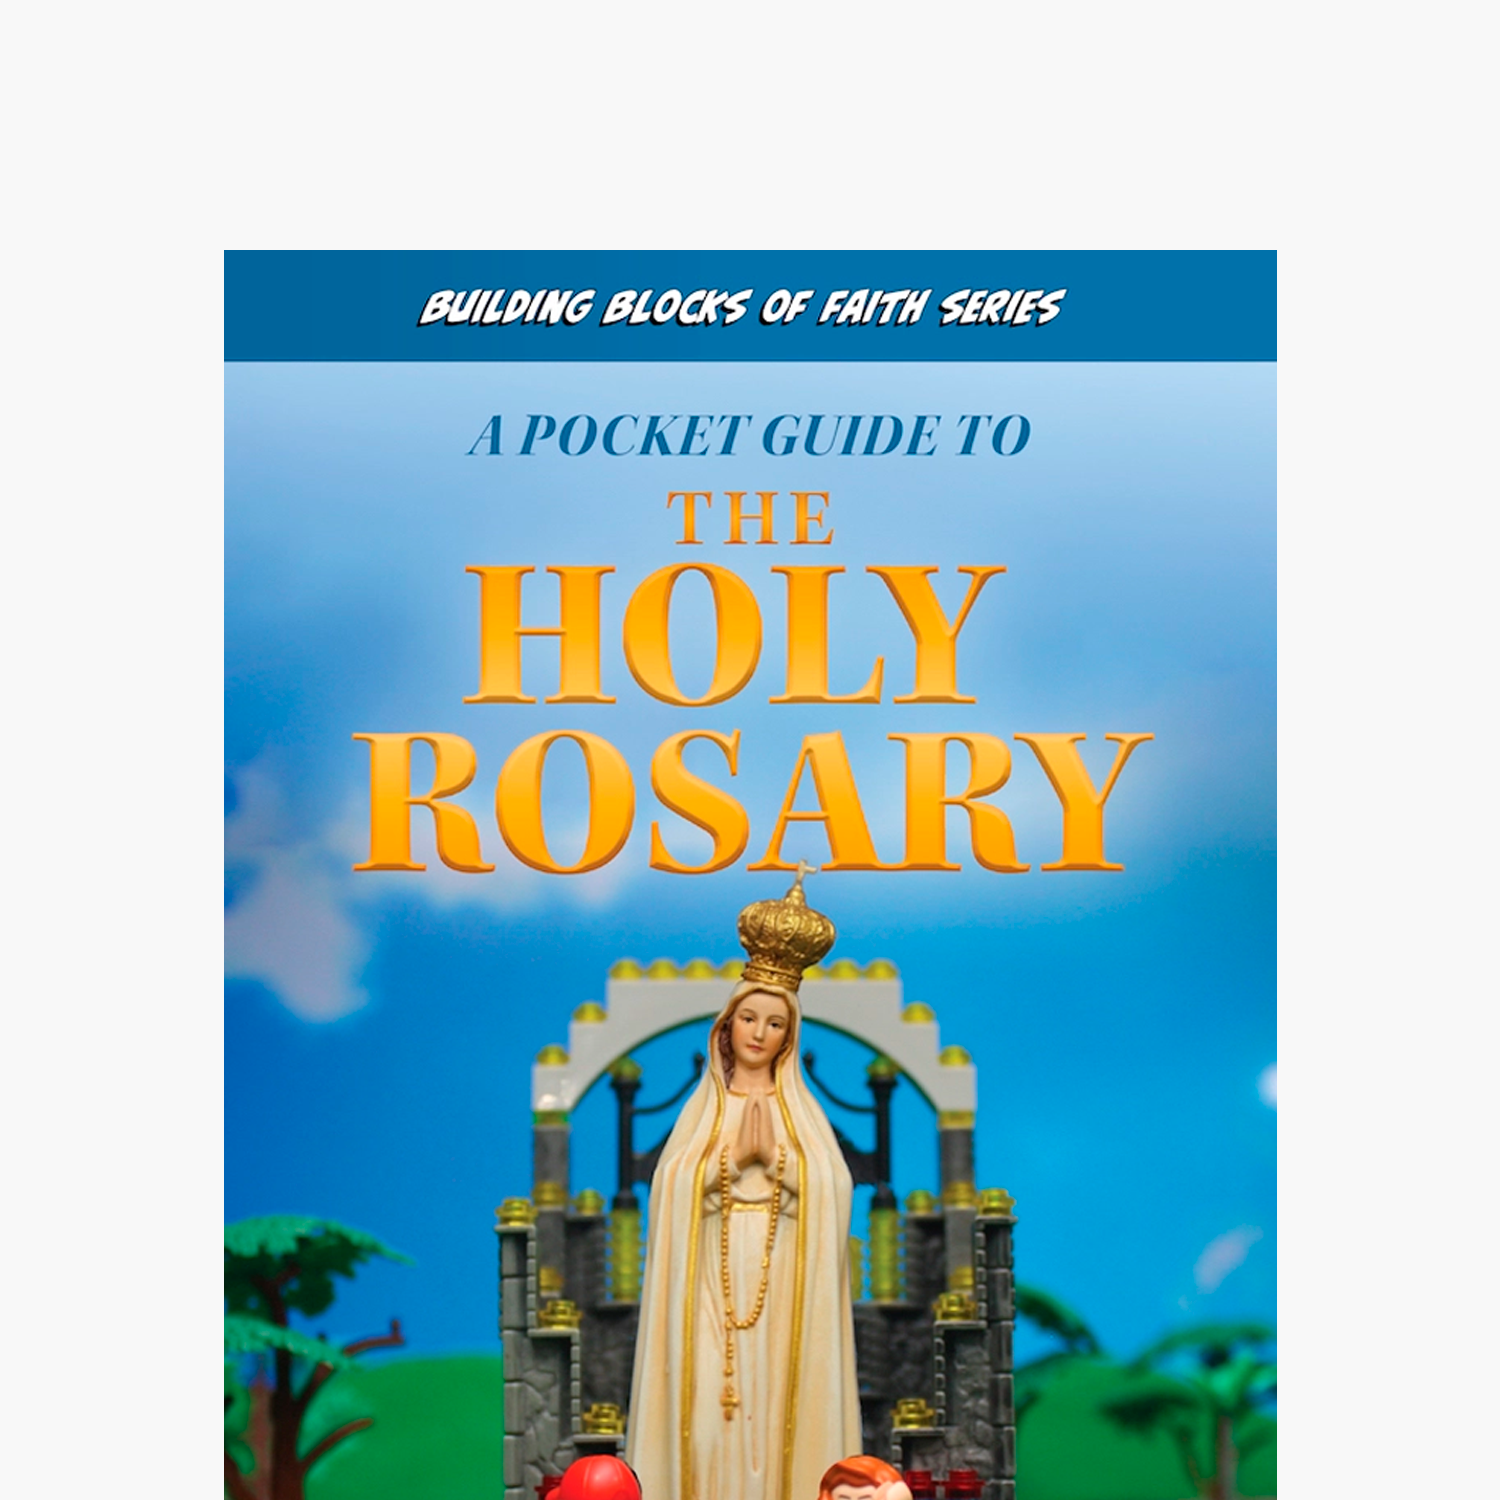 A Pocket Guide to the Rosary